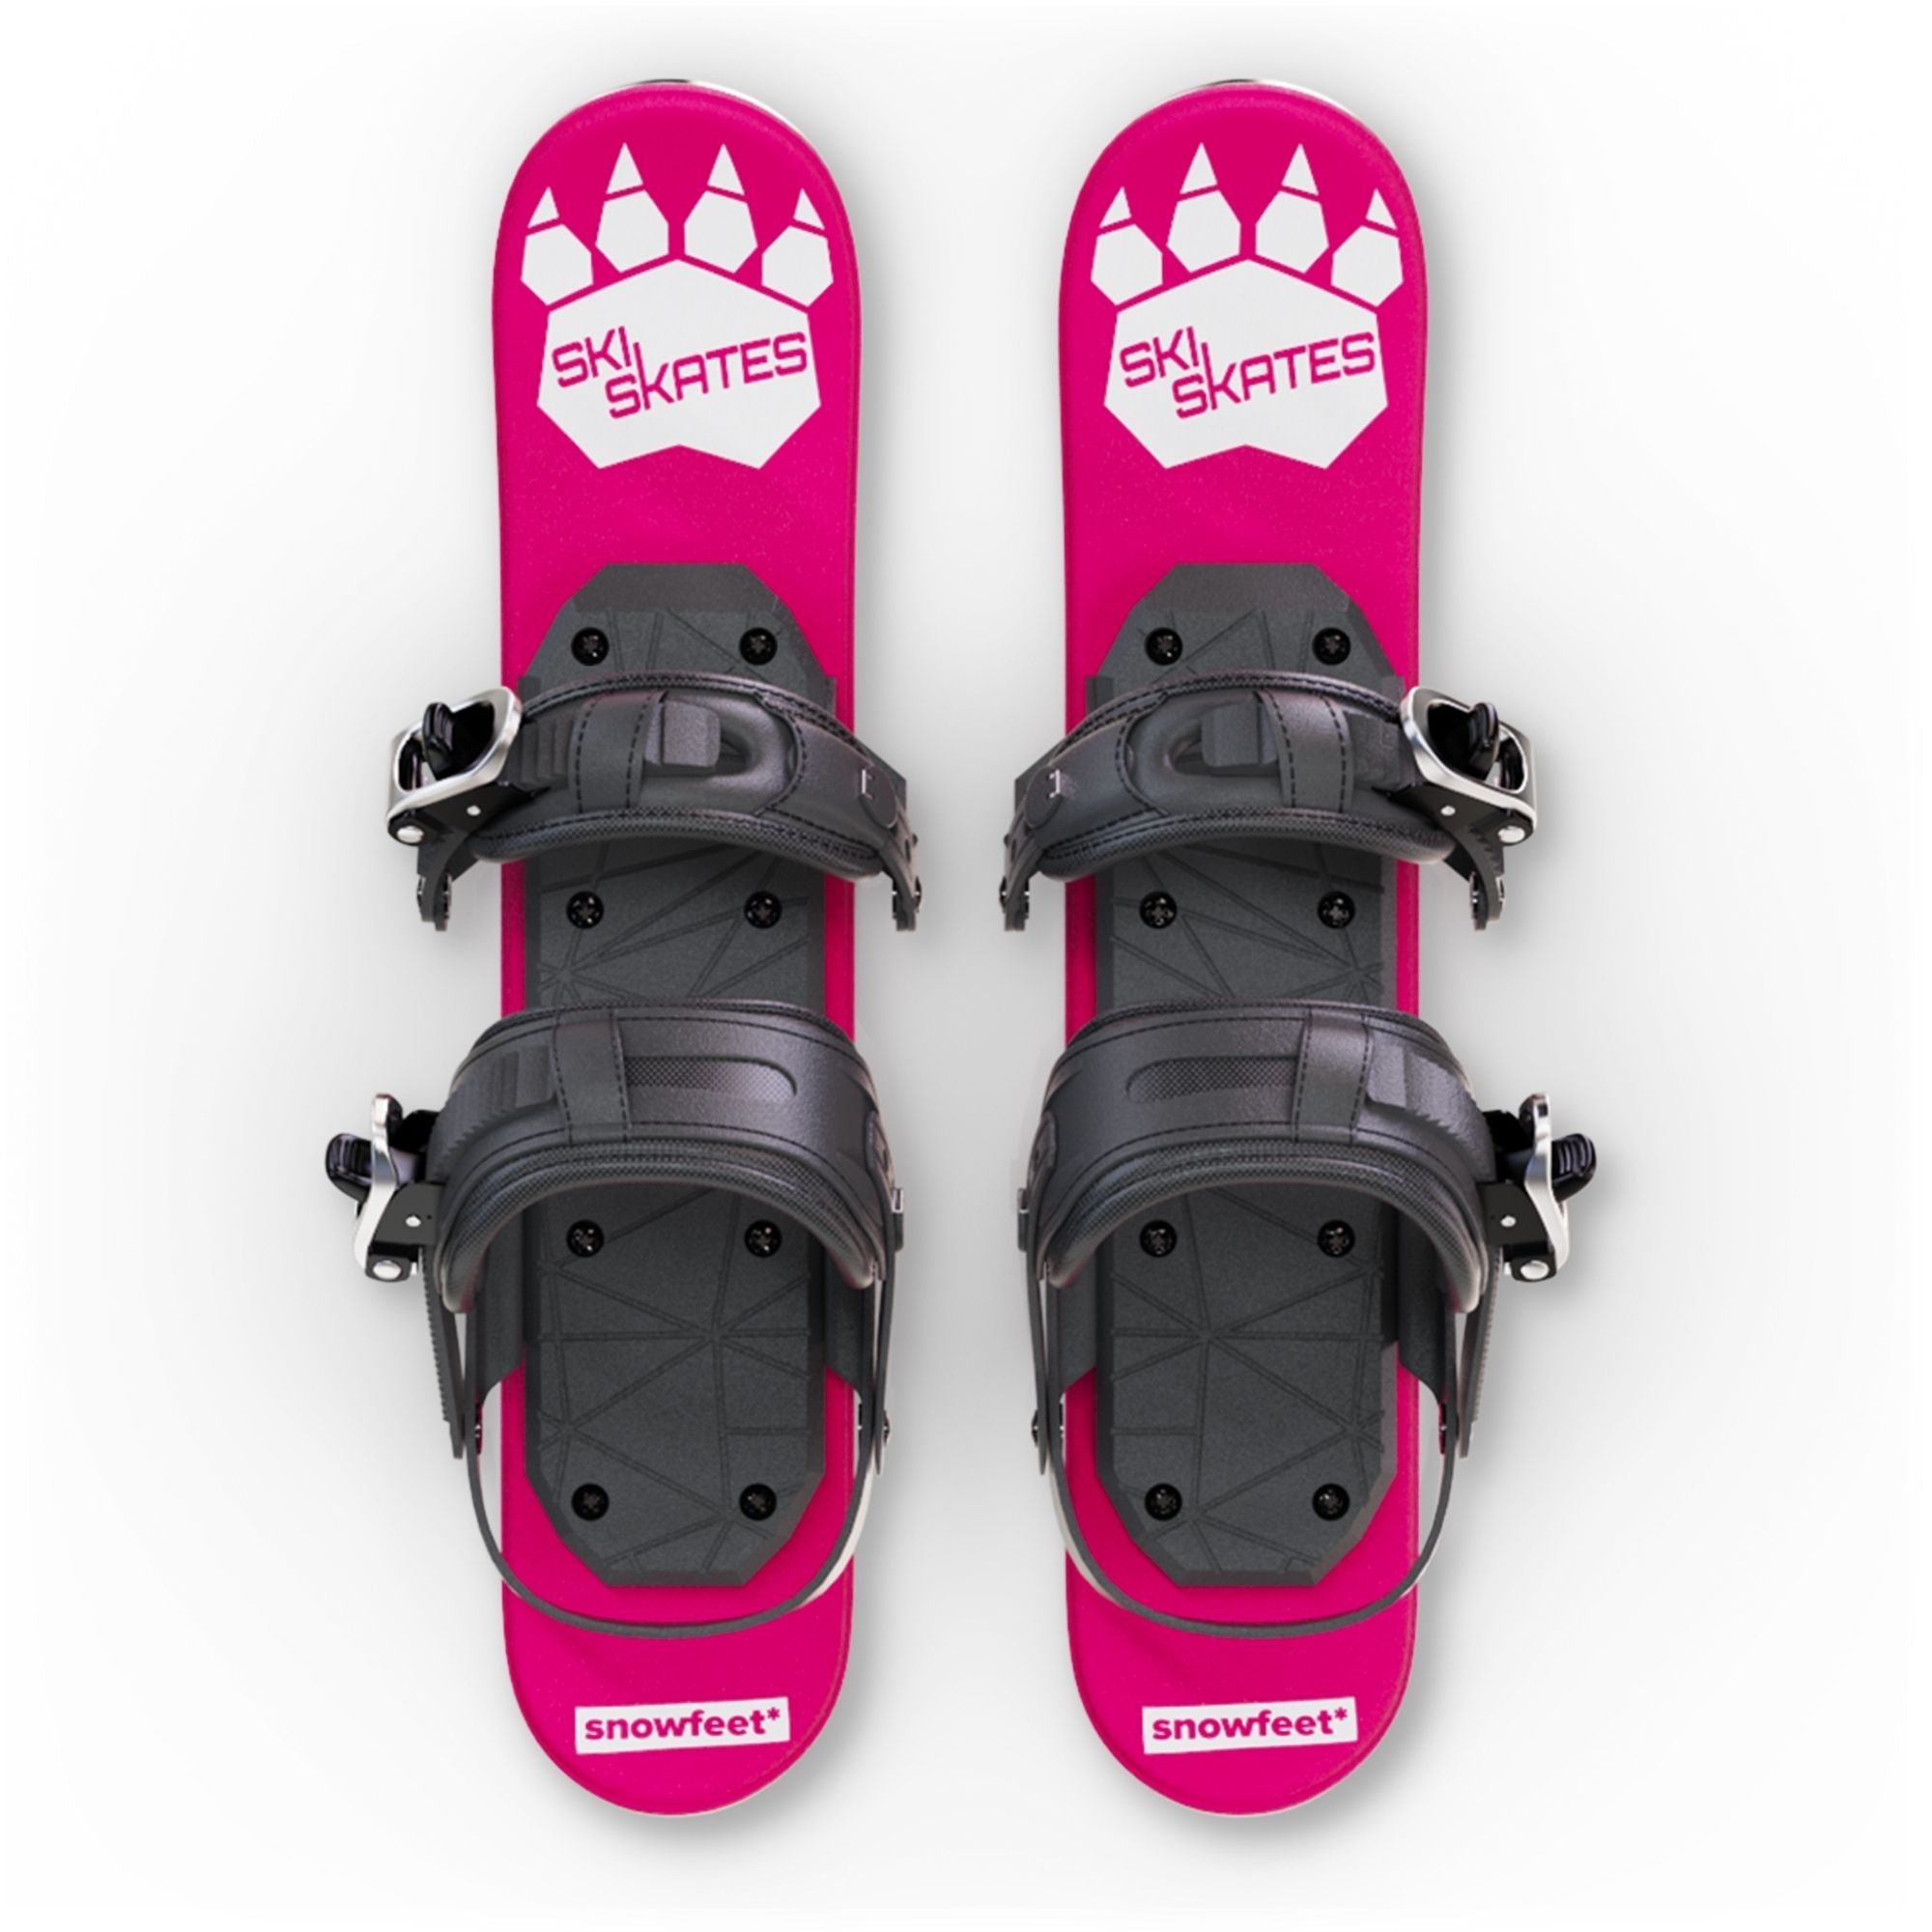 Snowboard Boots: How to Choose